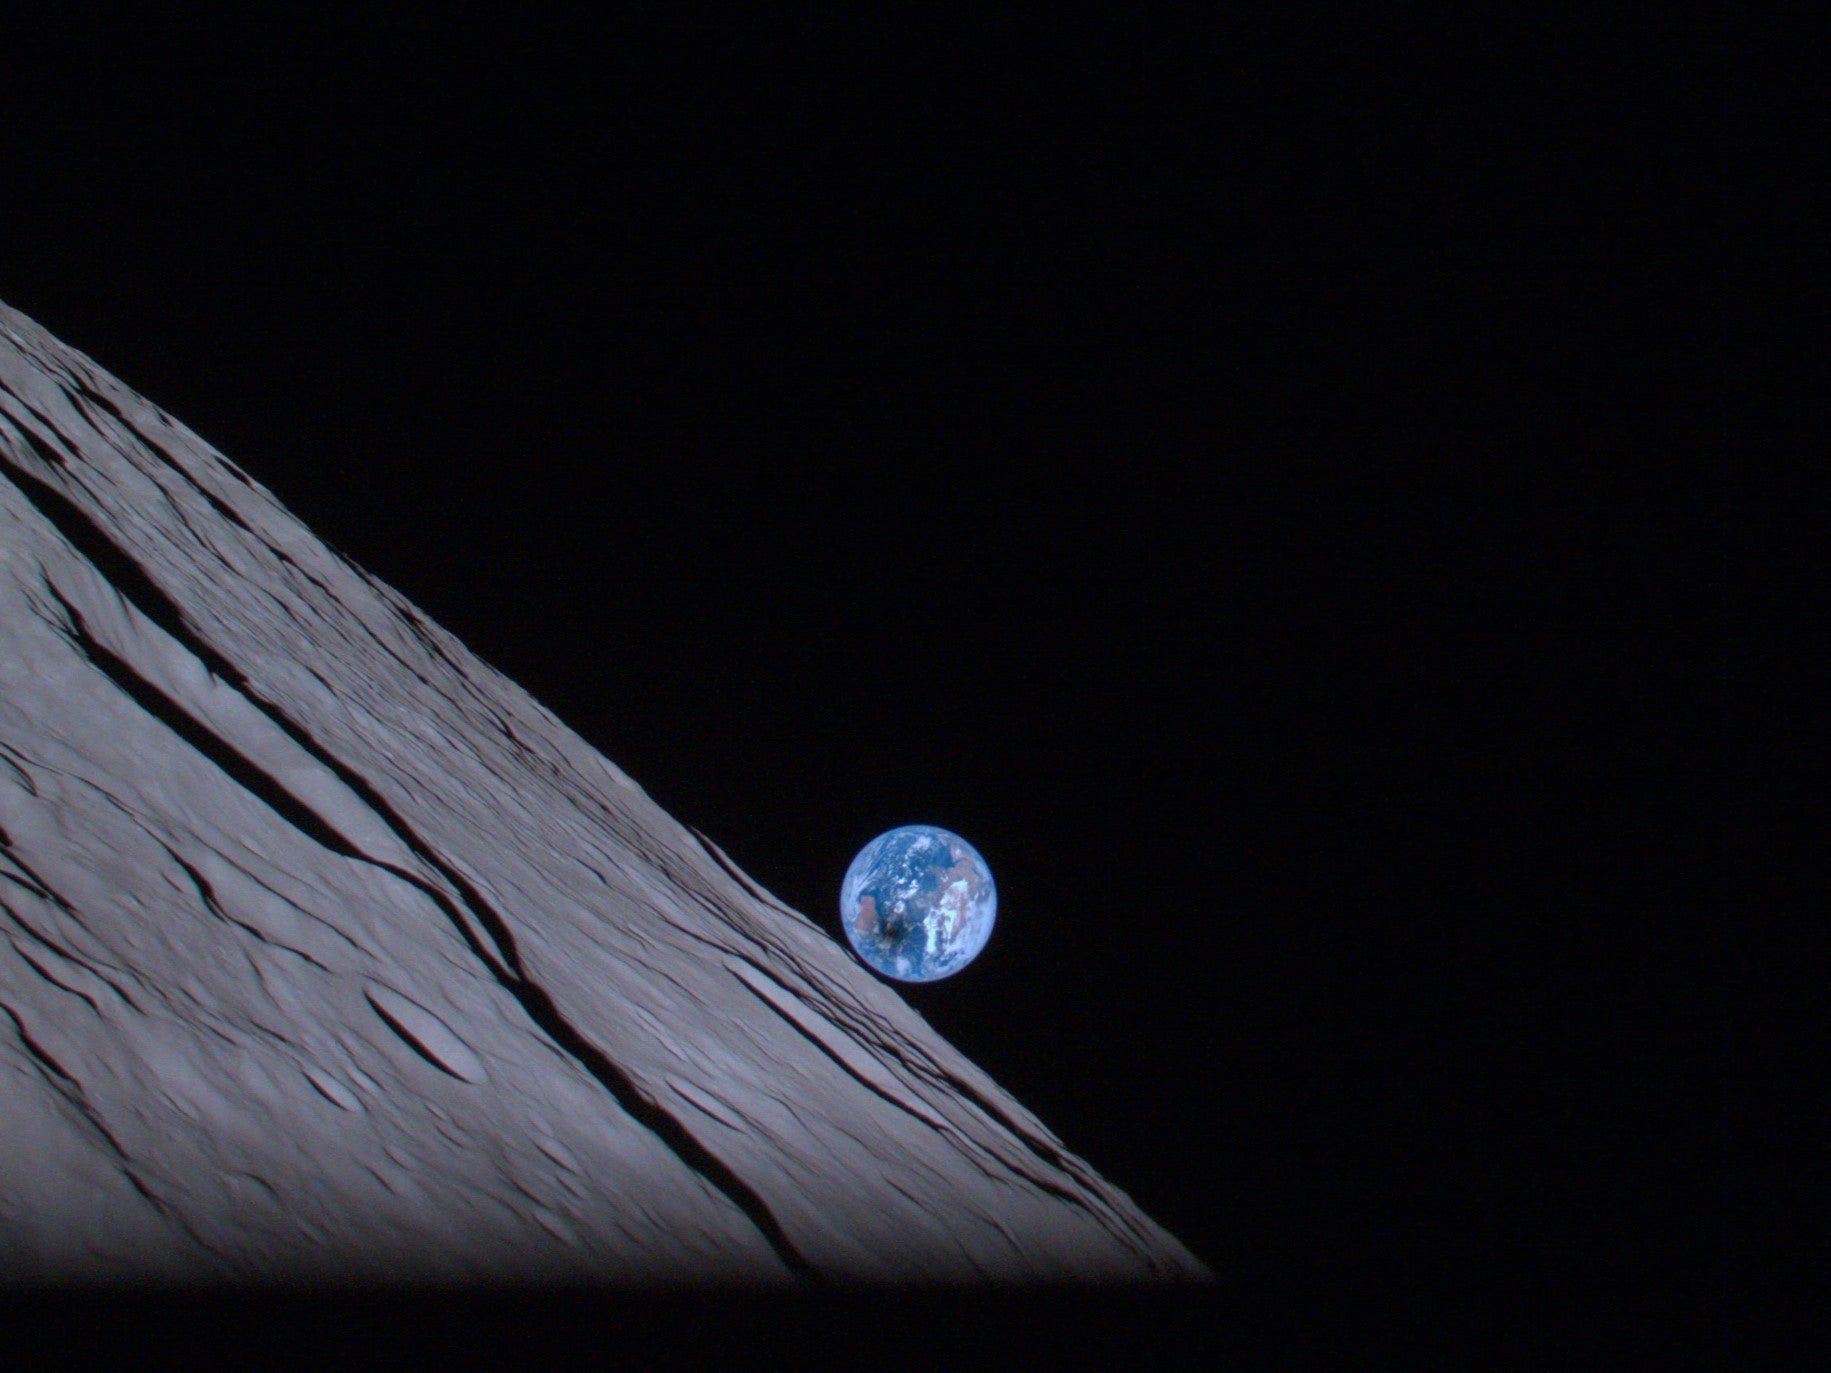 The lunar Earthrise during solar eclipse – captured by the camera of ispace’s Mission 1 lander at an altitude of about 100 km from the lunar surface